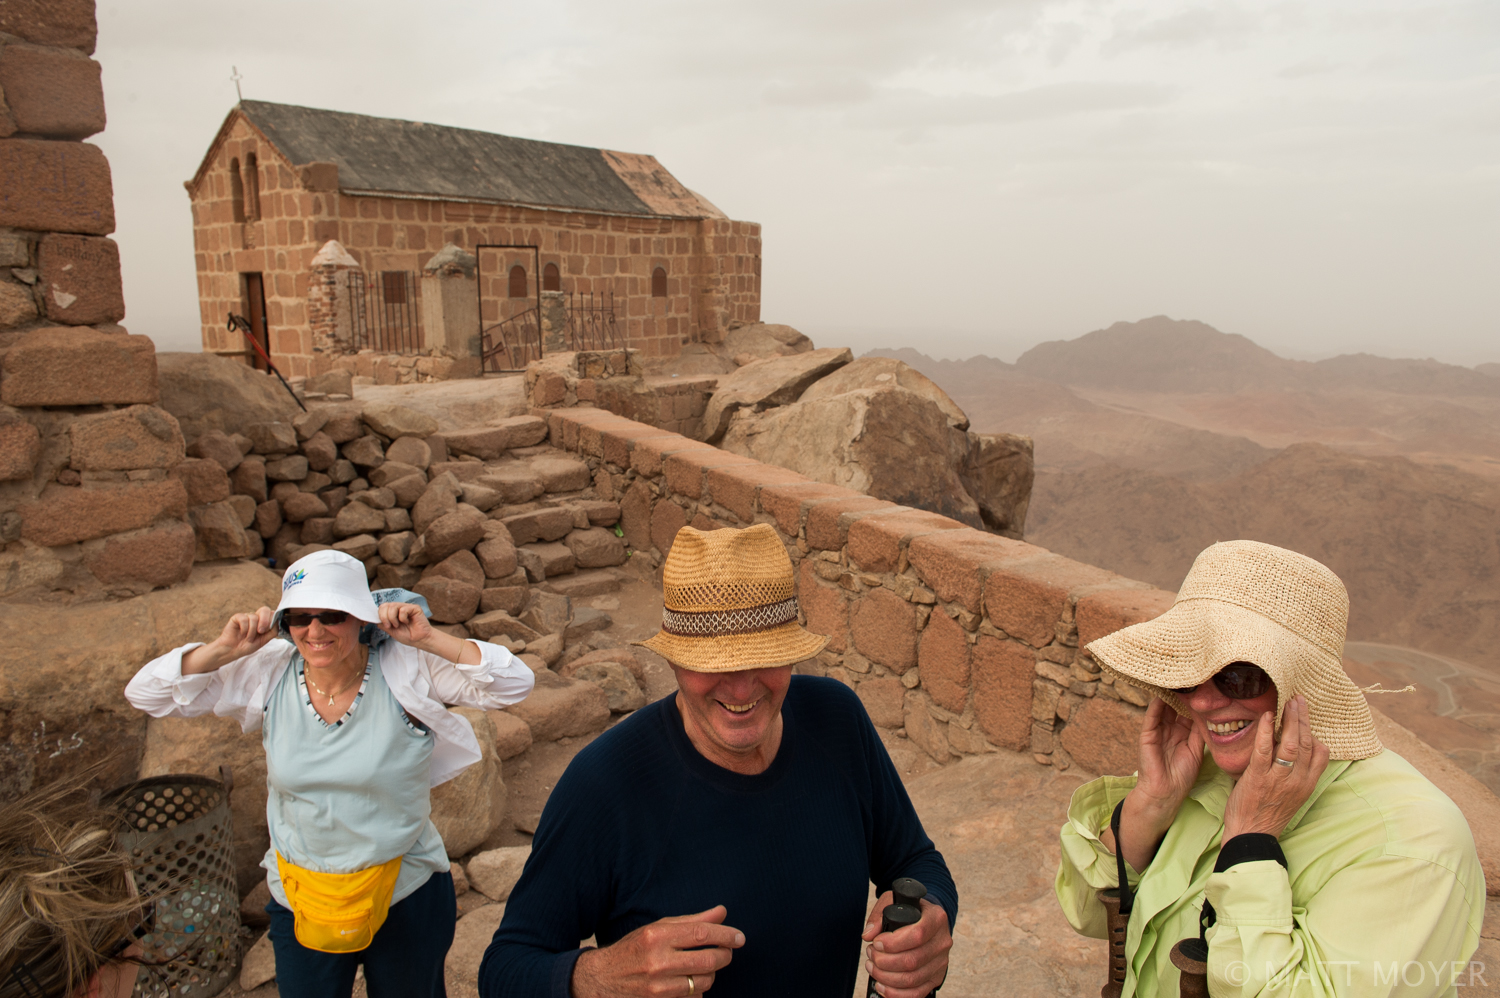  Tourists battle the wind atop the biblical Mount Sinai in Egypt. 